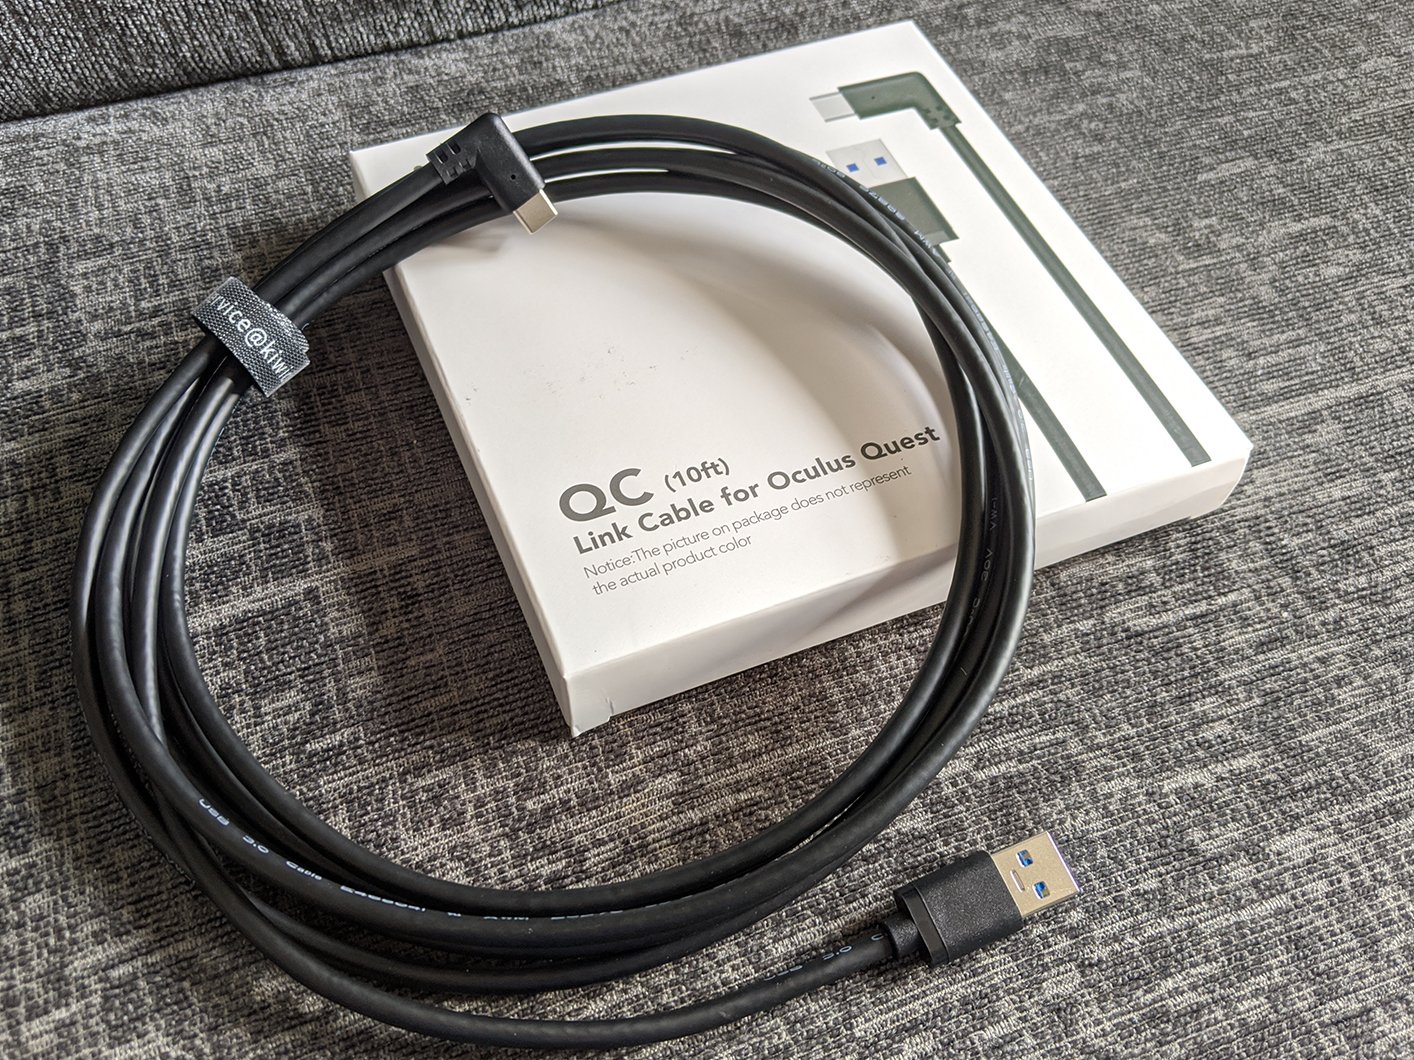 Official GBAtemp Review: KIWI Design 10ft (3m) Oculus Quest Link cable  (Hardware) | GBAtemp.net - The Independent Video Game Community